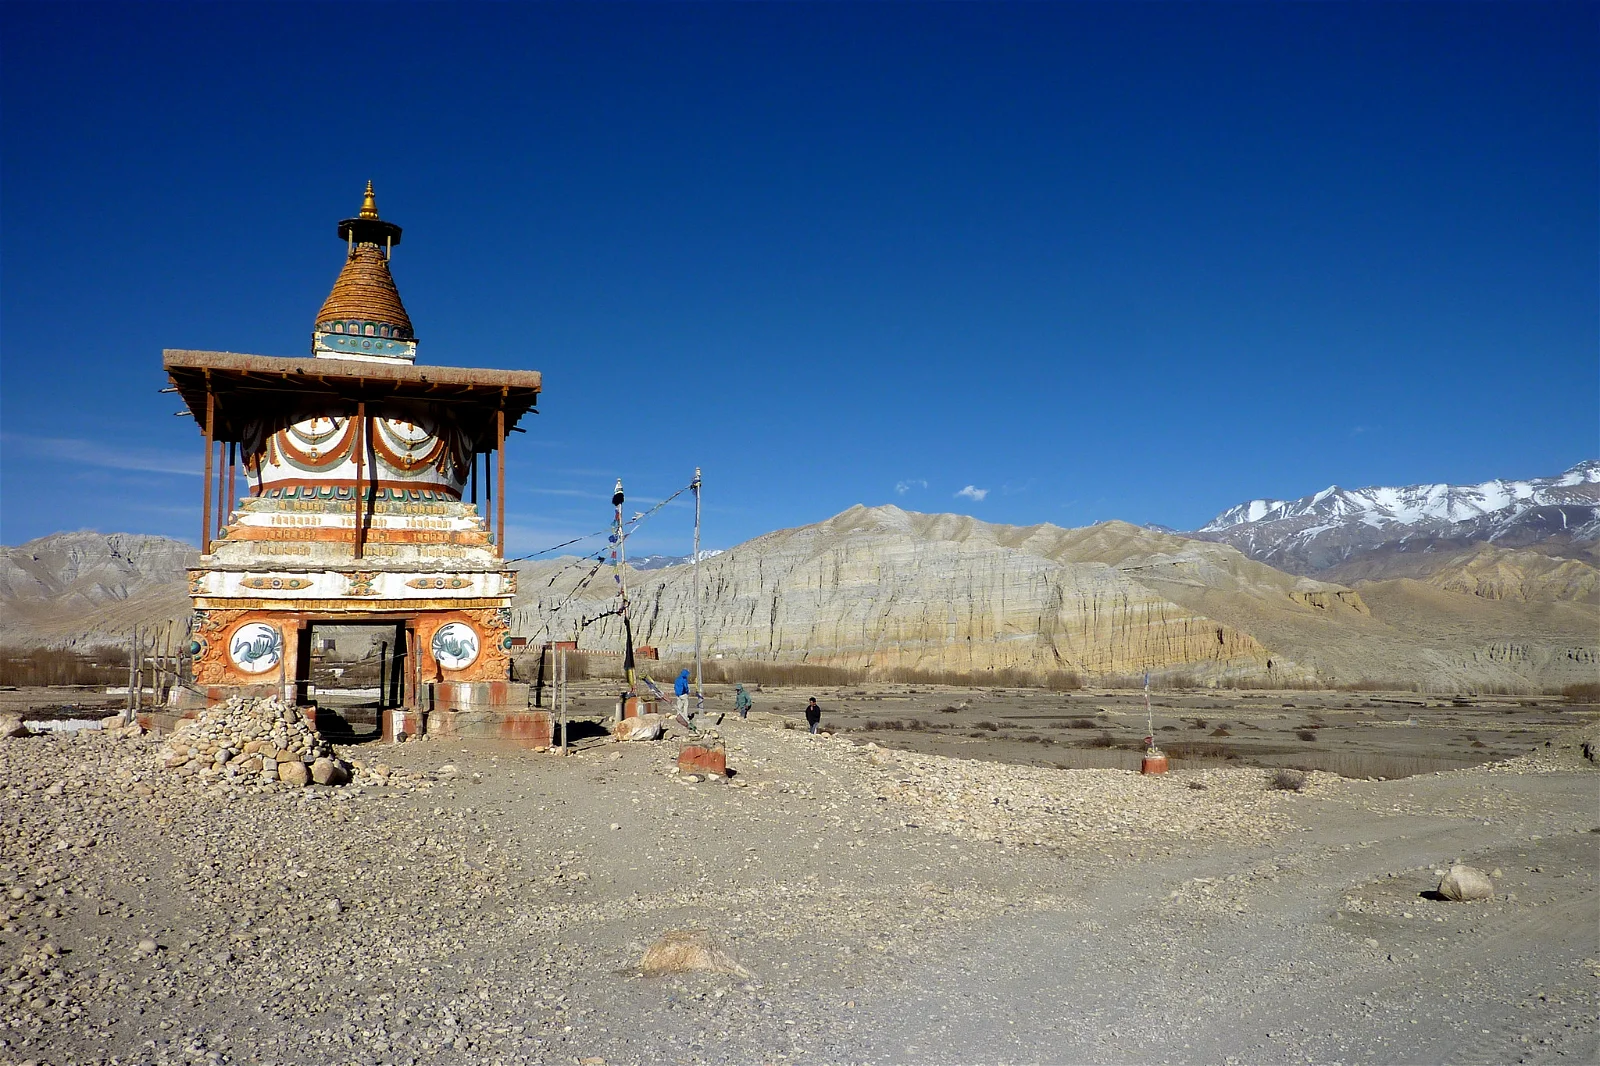 Trek from Tsarang to Lo-Manthang 3840m: Upper Trail 7-8 hours, Lower trail 4-5 hours'